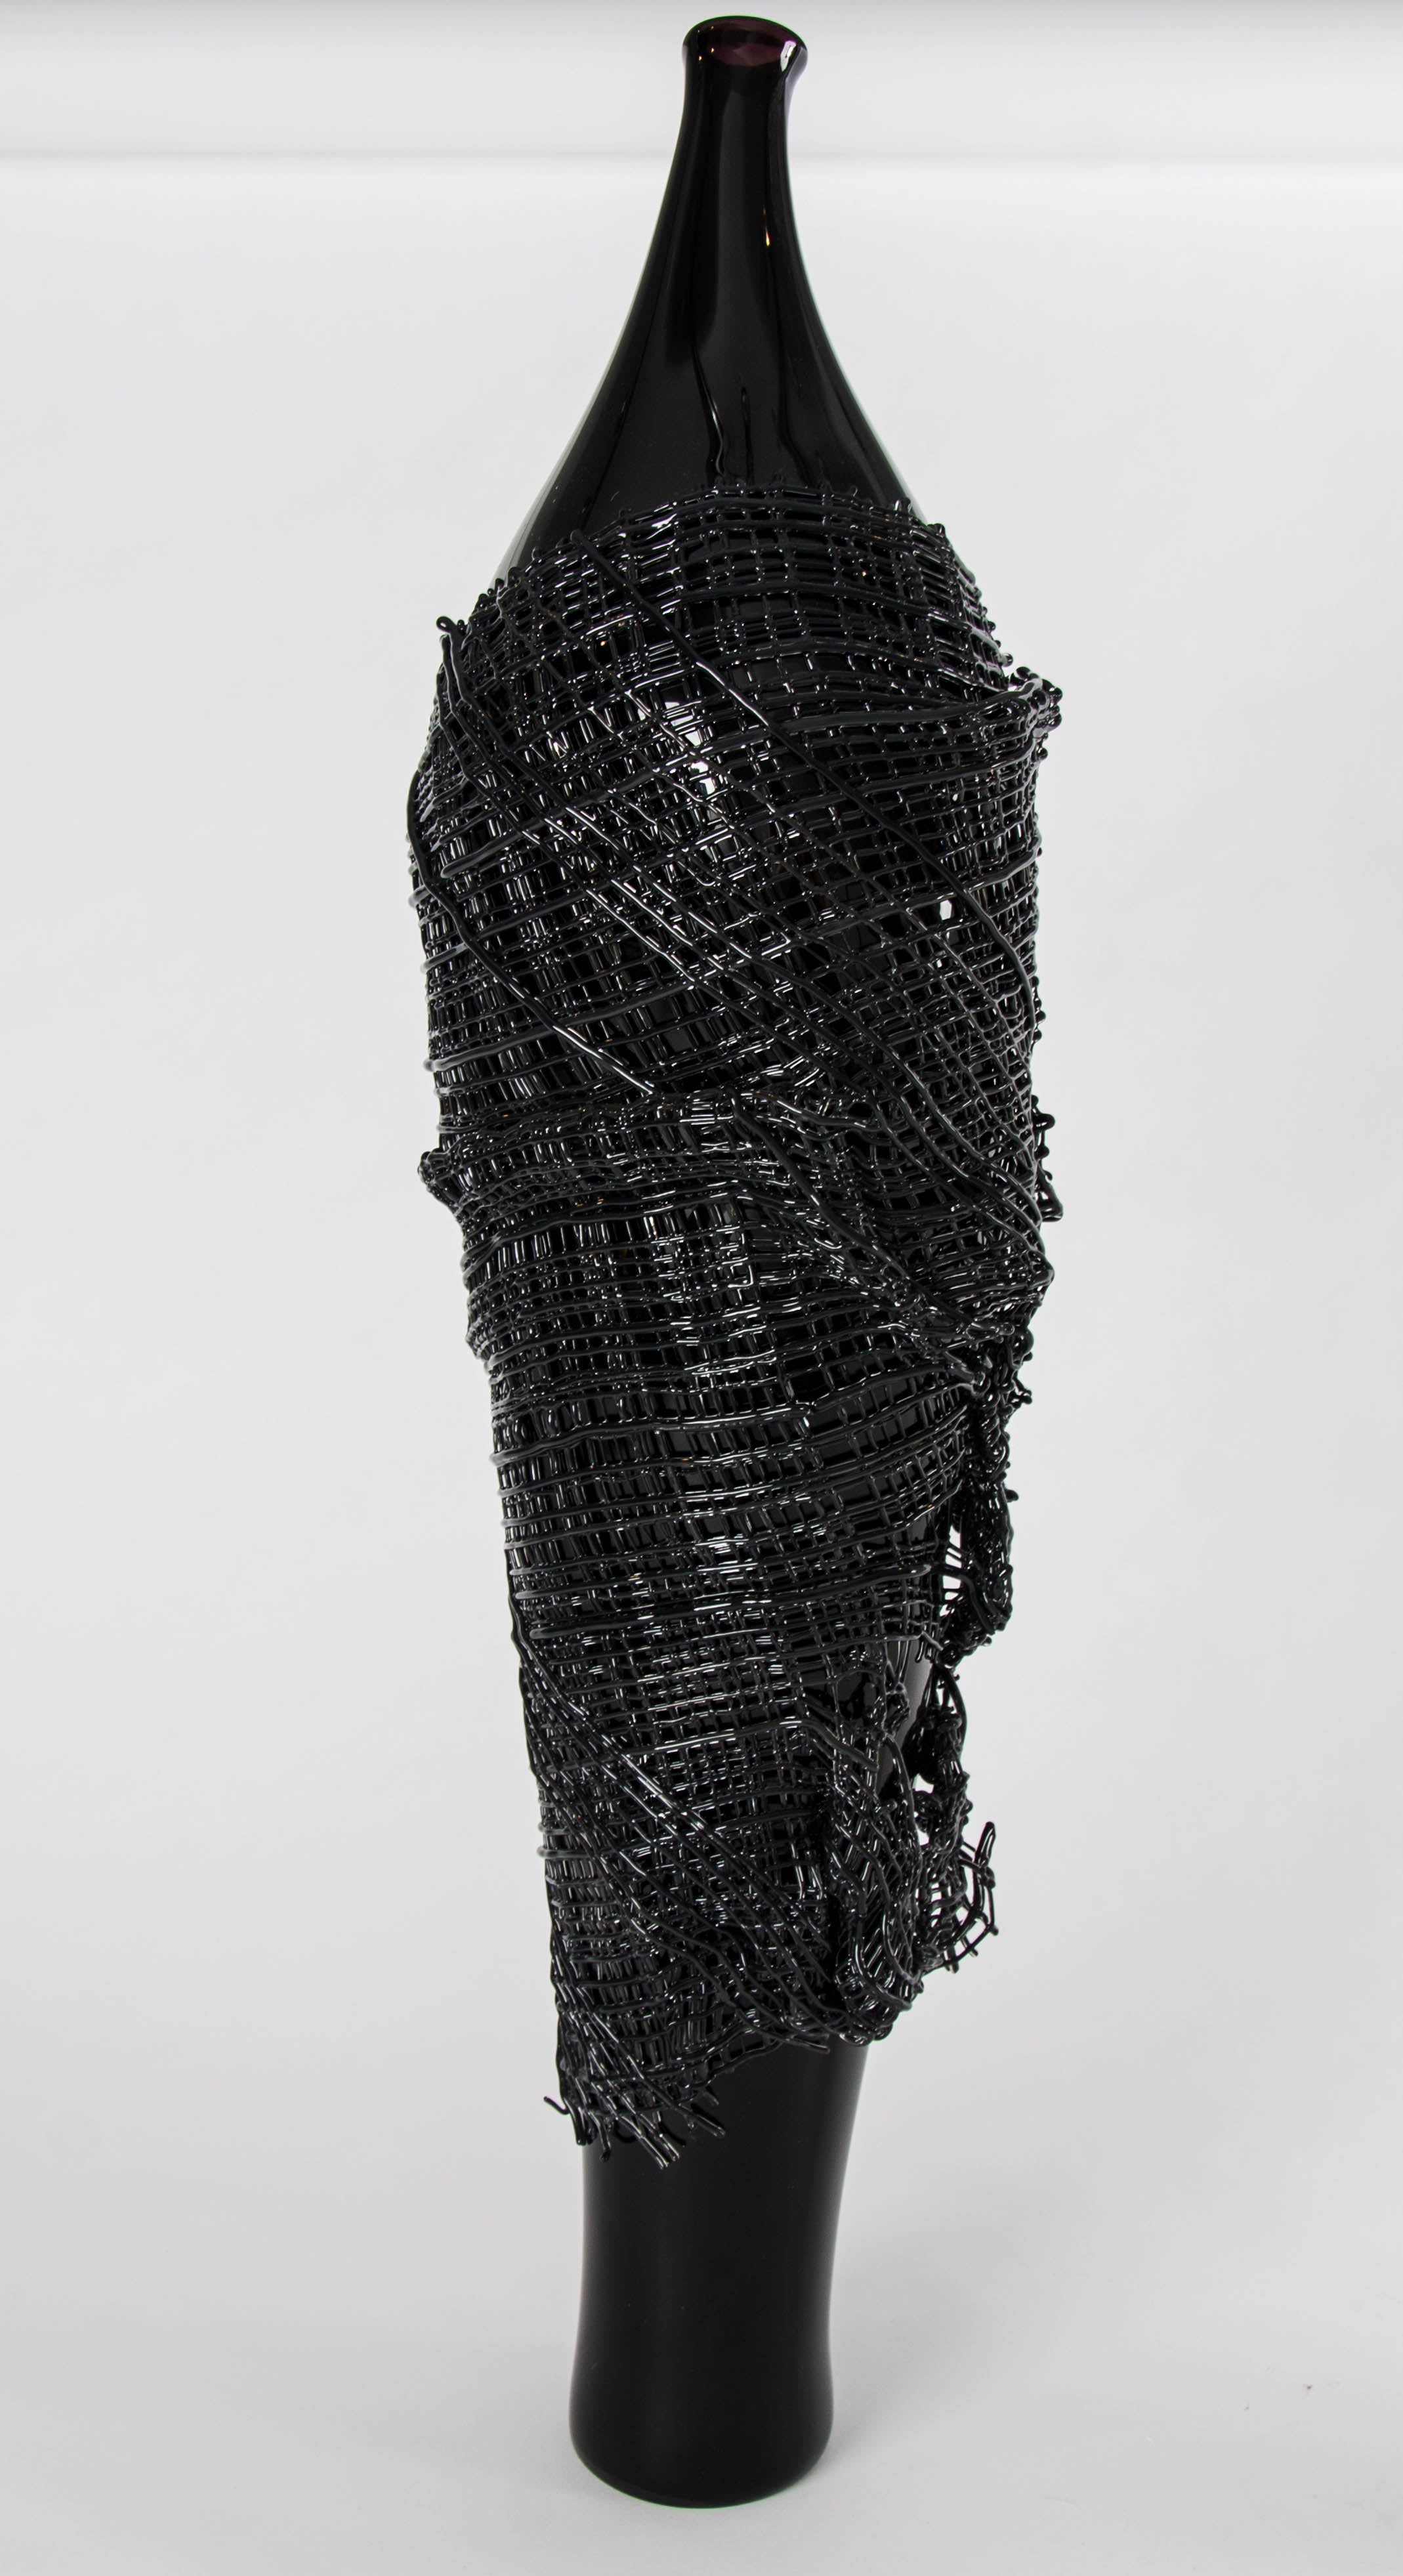 Blown Glass Odysseus and Calypso black and white glass sculptures by Cathryn Shilling